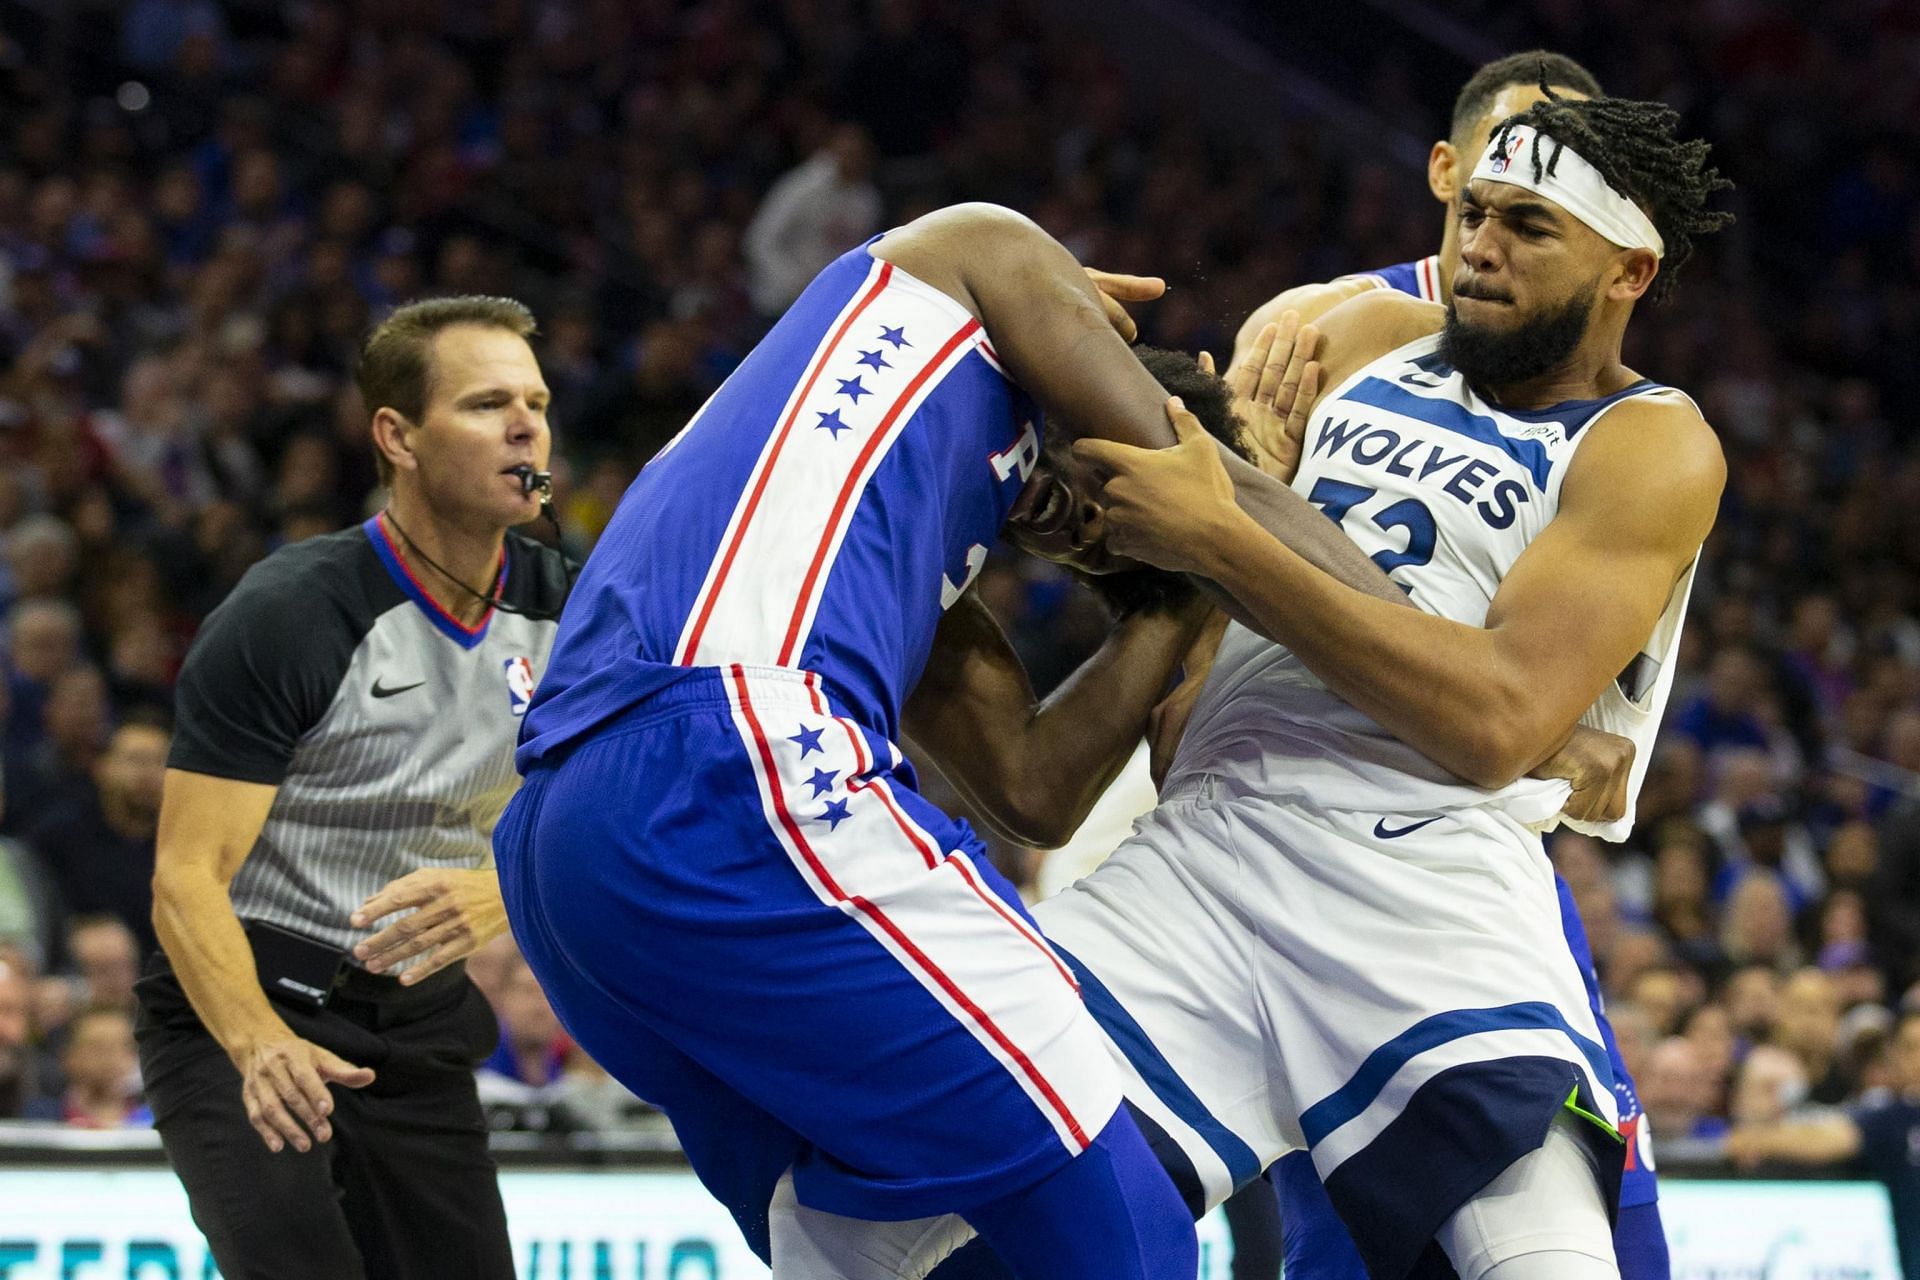 The NBA could witness yet another titanic battle tonight if Joel Embiid is cleared to play against Karl-Anthony Towns and the Minnesota Timberwolves. [Photo: Bleacher Report]